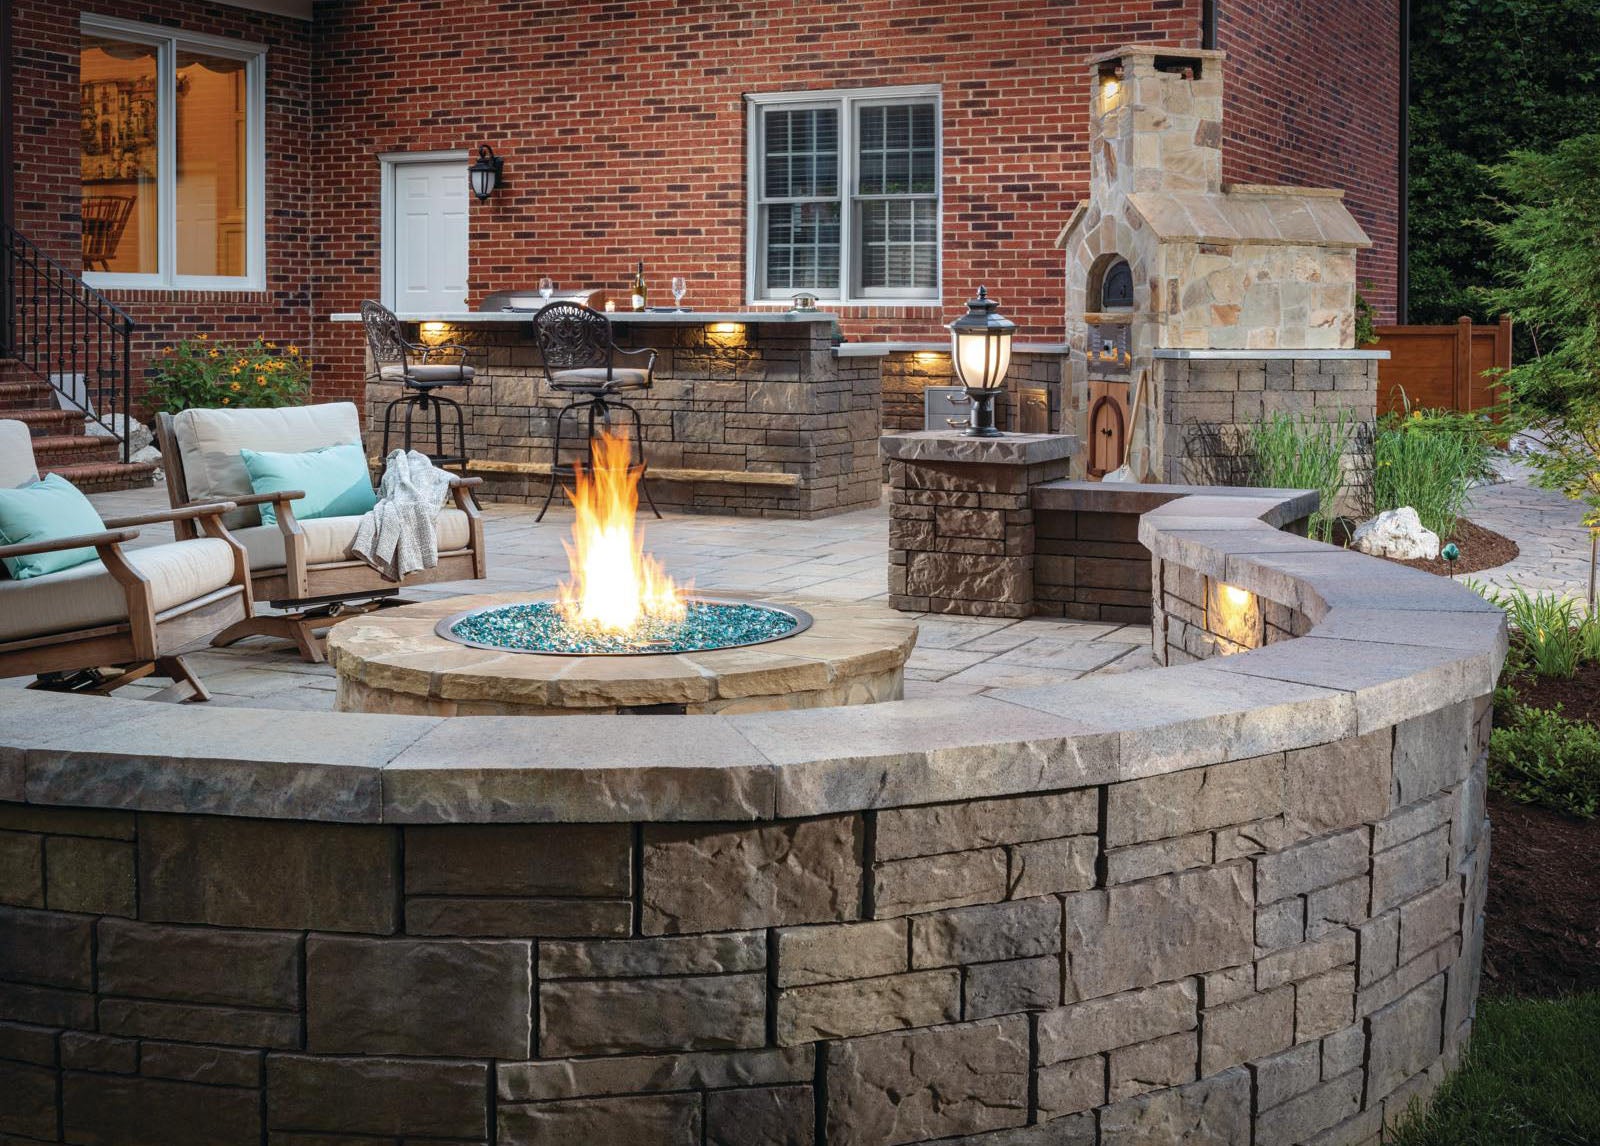 Designing A Patio Around Fire Pit, Fire Pit Area